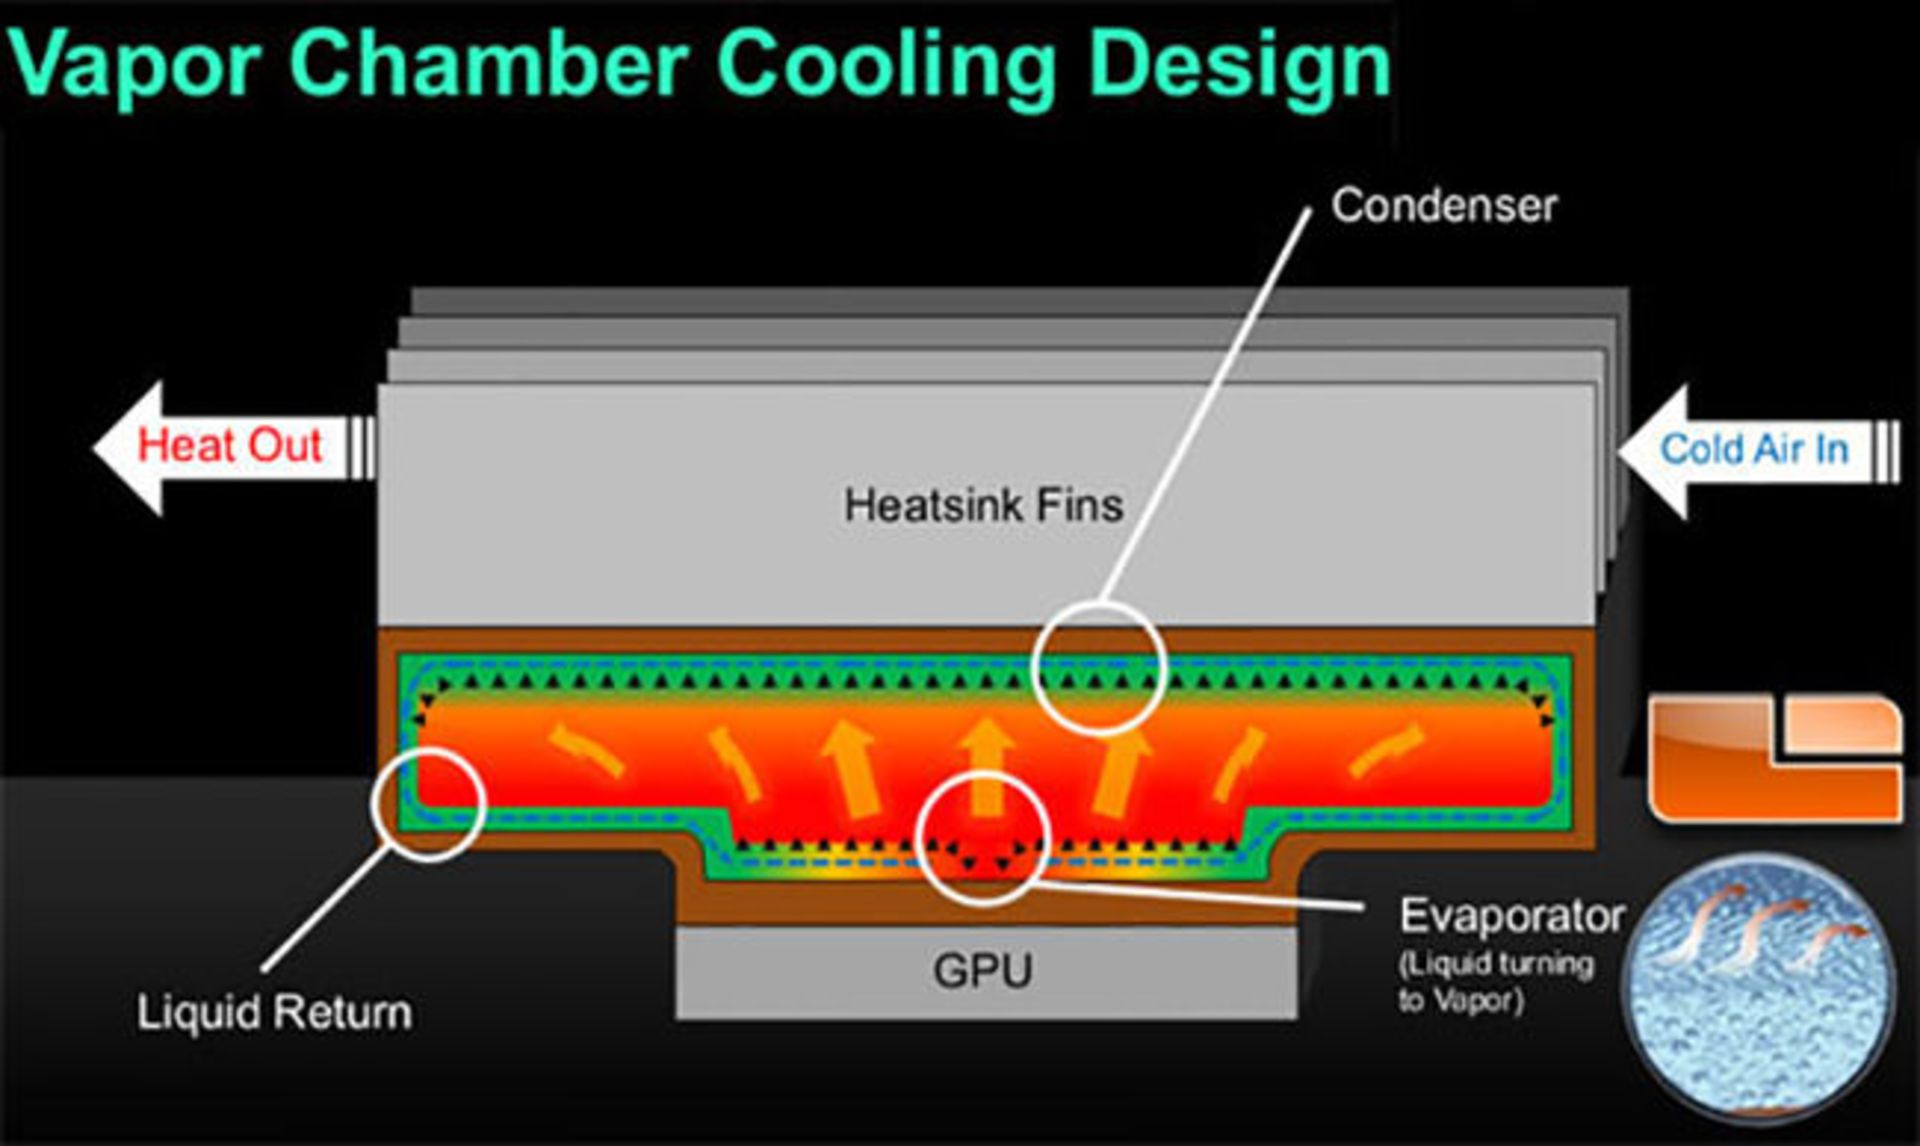 compare-defrent-cooling-system-14